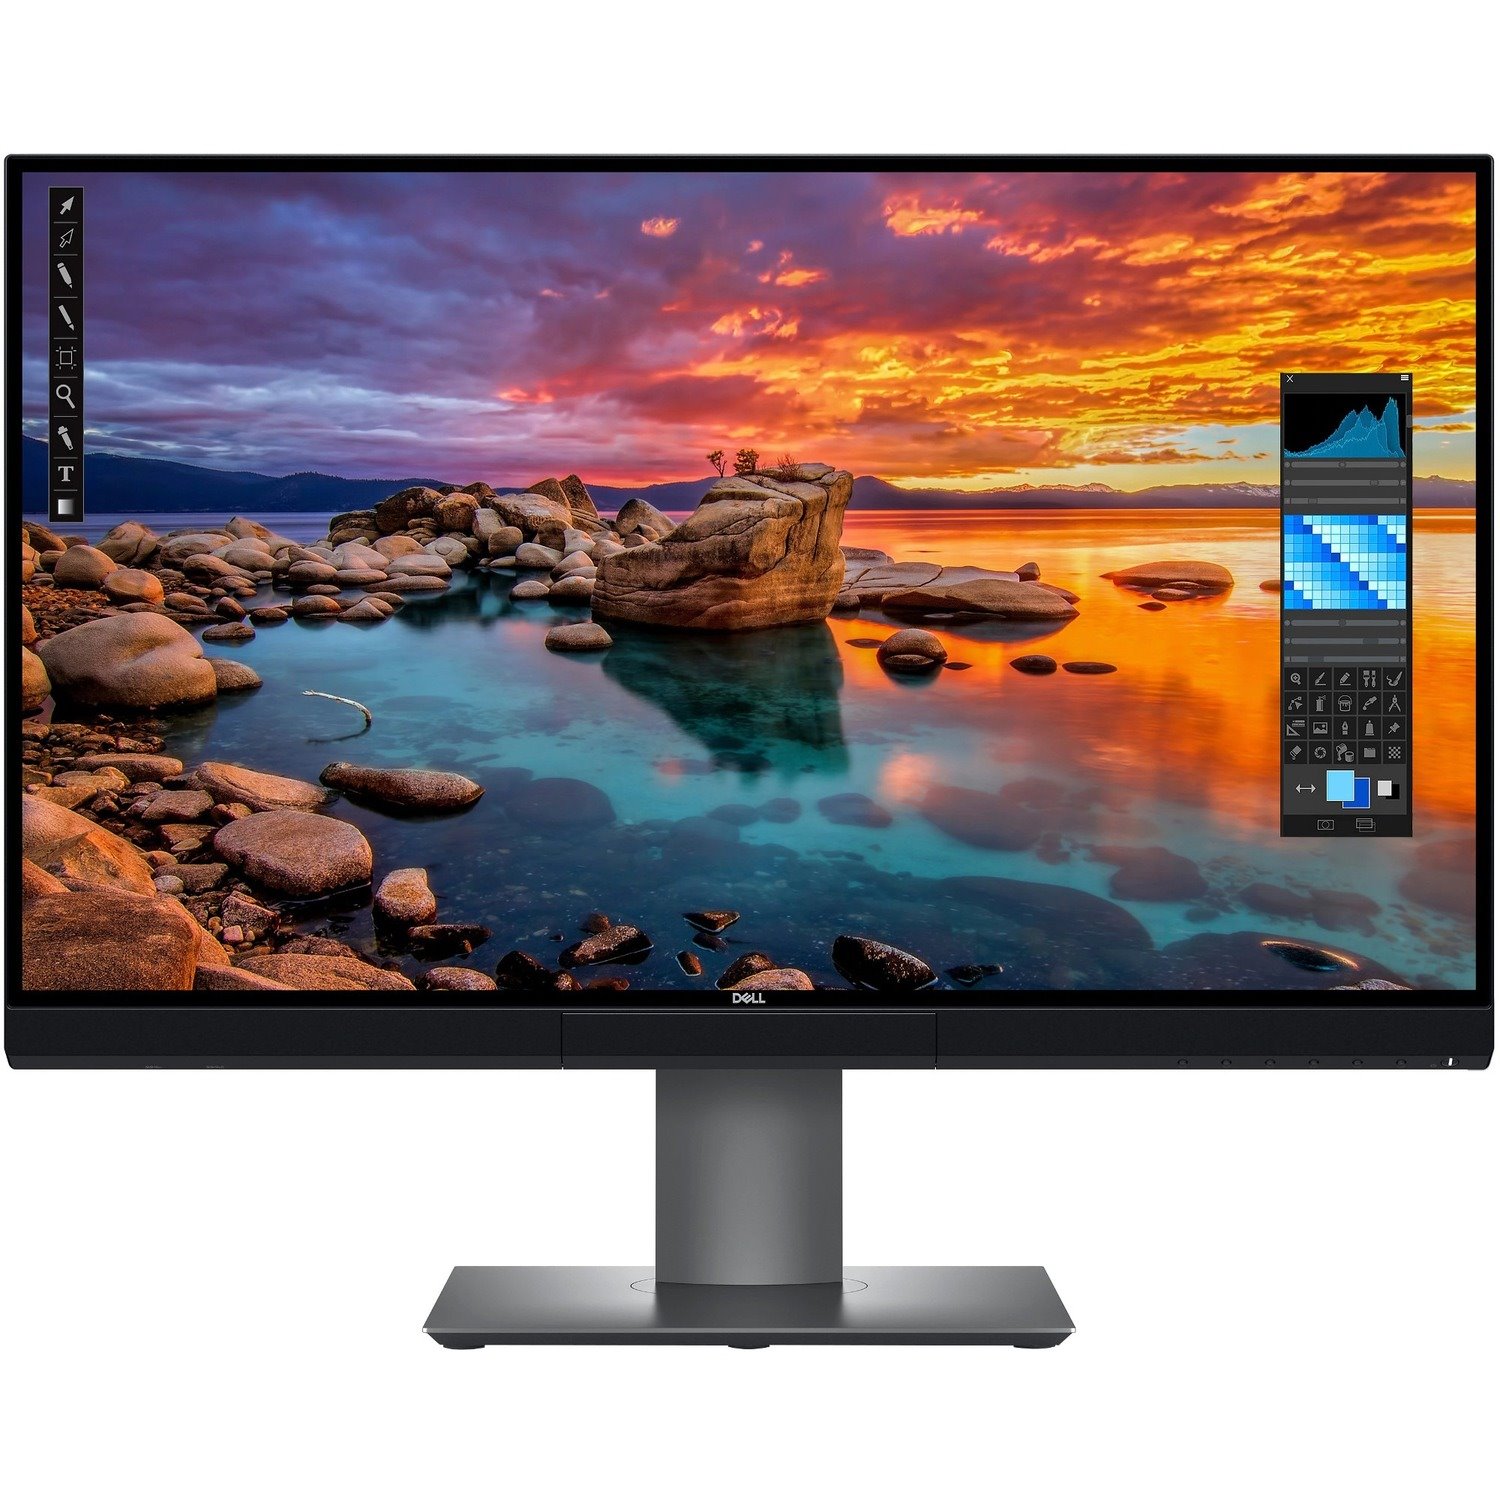 Dell UP2720Q 68.6 cm (27") 4K LED LCD Monitor - 16:9